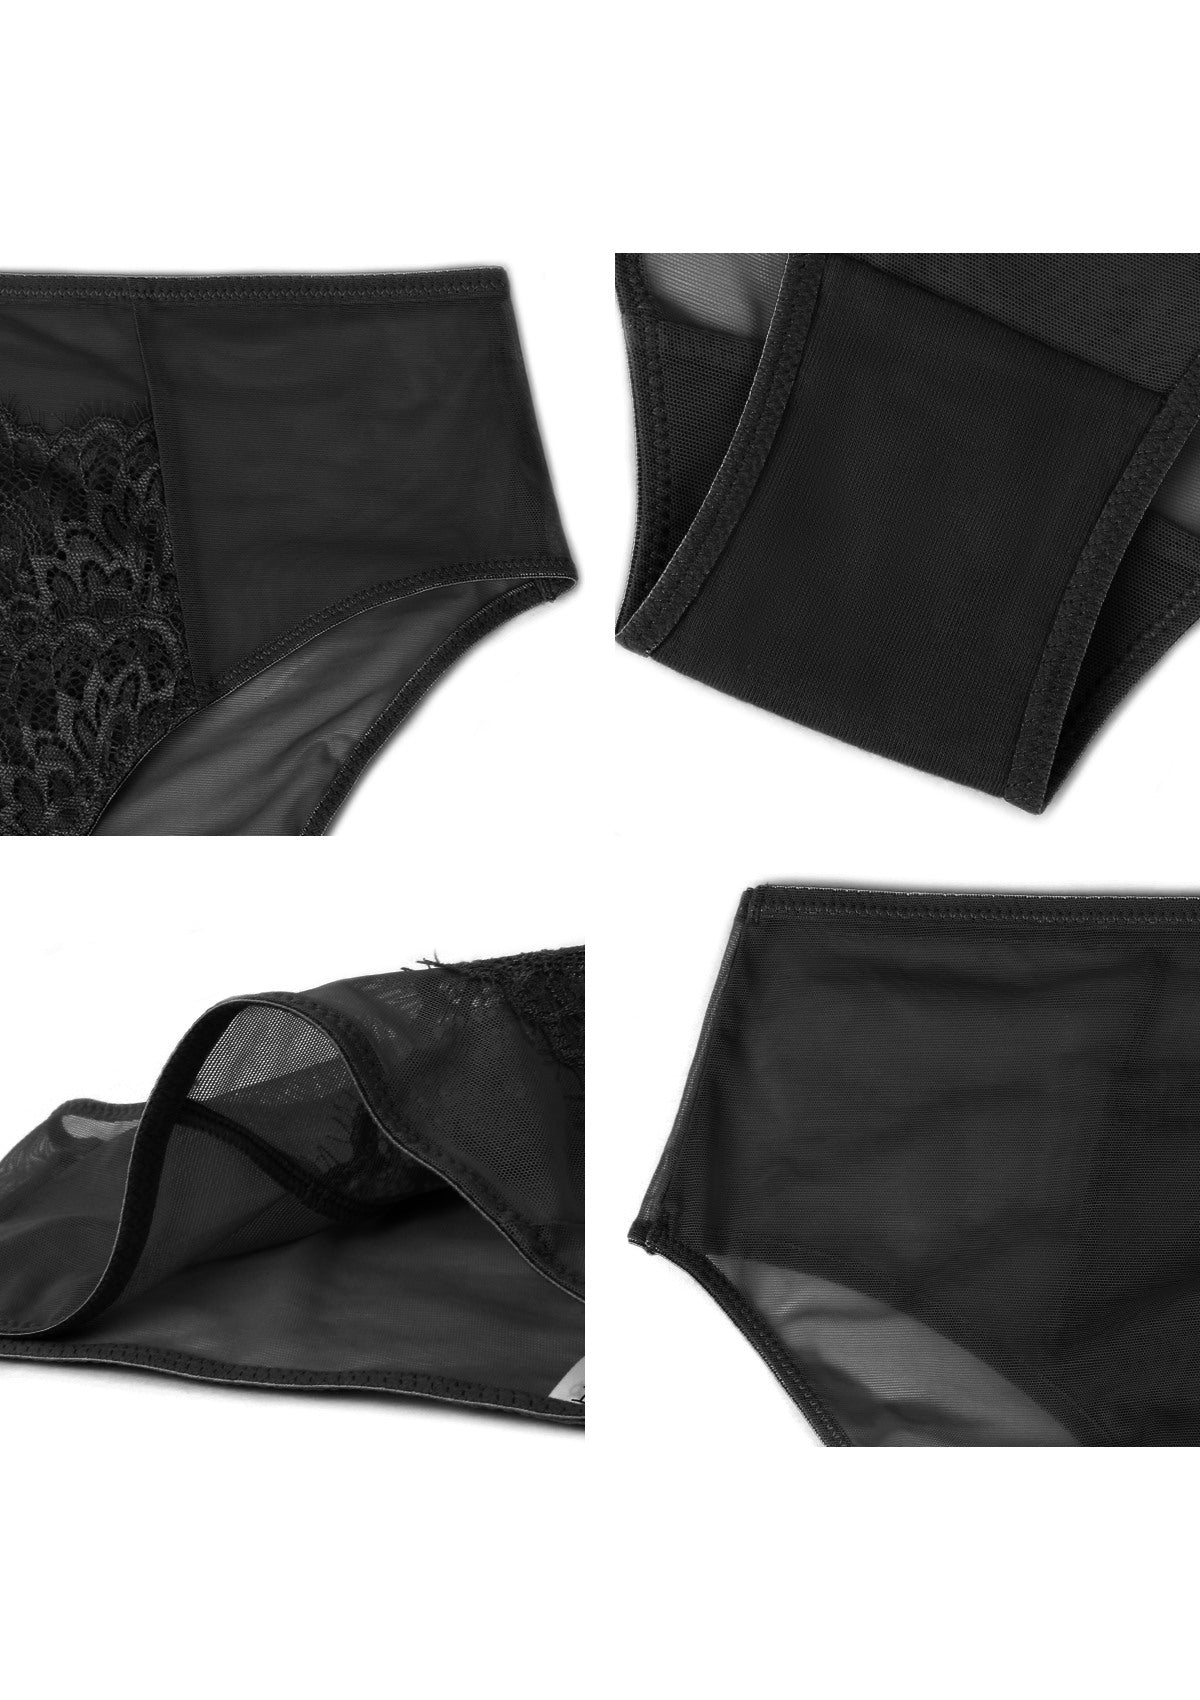 HSIA Spring Romance High-Rise Floral Lacy Panty-Comfort In Style - XXXL / Black